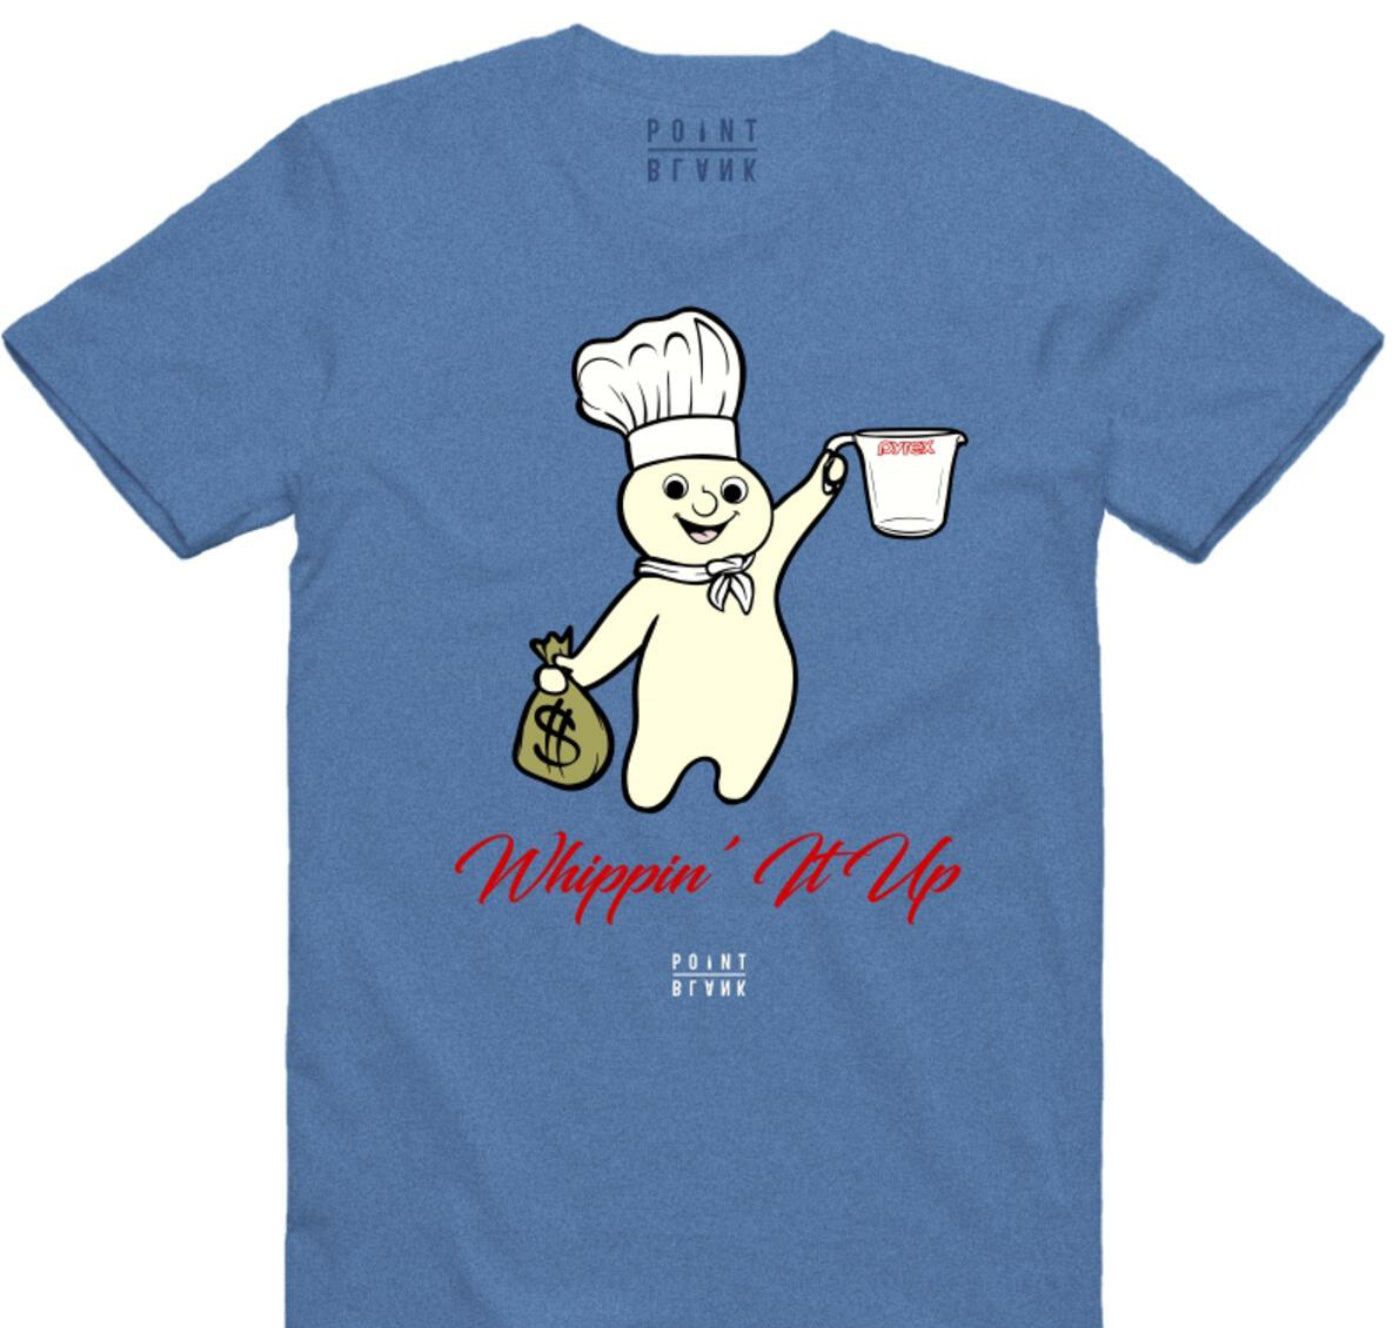 WHIPPIN’IT UP TEE